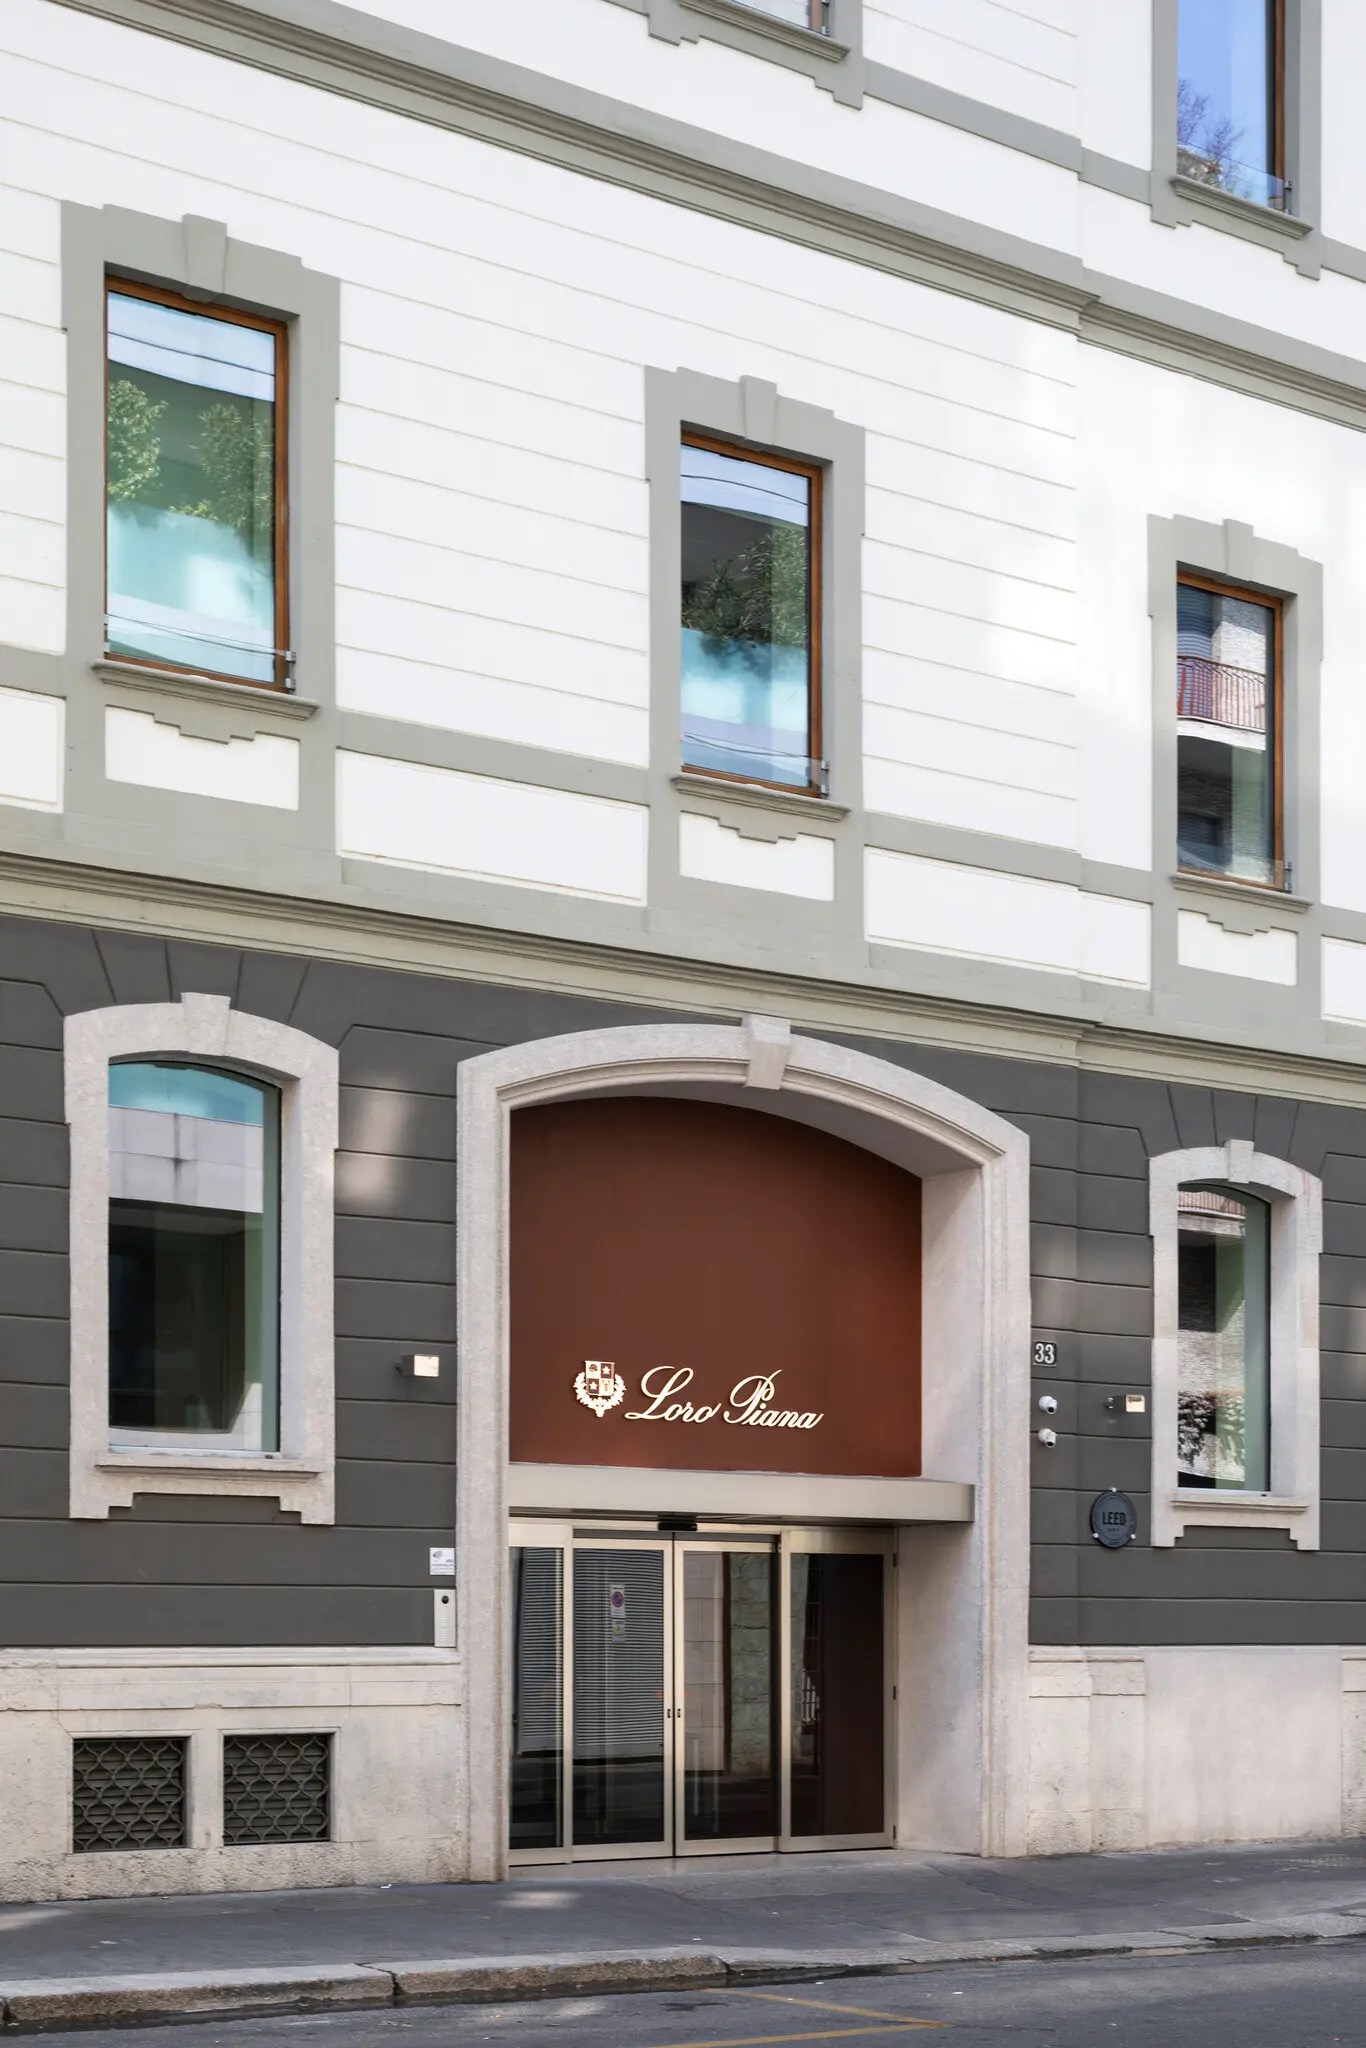 The facade of Via della Moscova 33, which was originally built in the late 19th century as the centre of operations for northern Italy’s silk consortium. Photography by Allegra Martin.